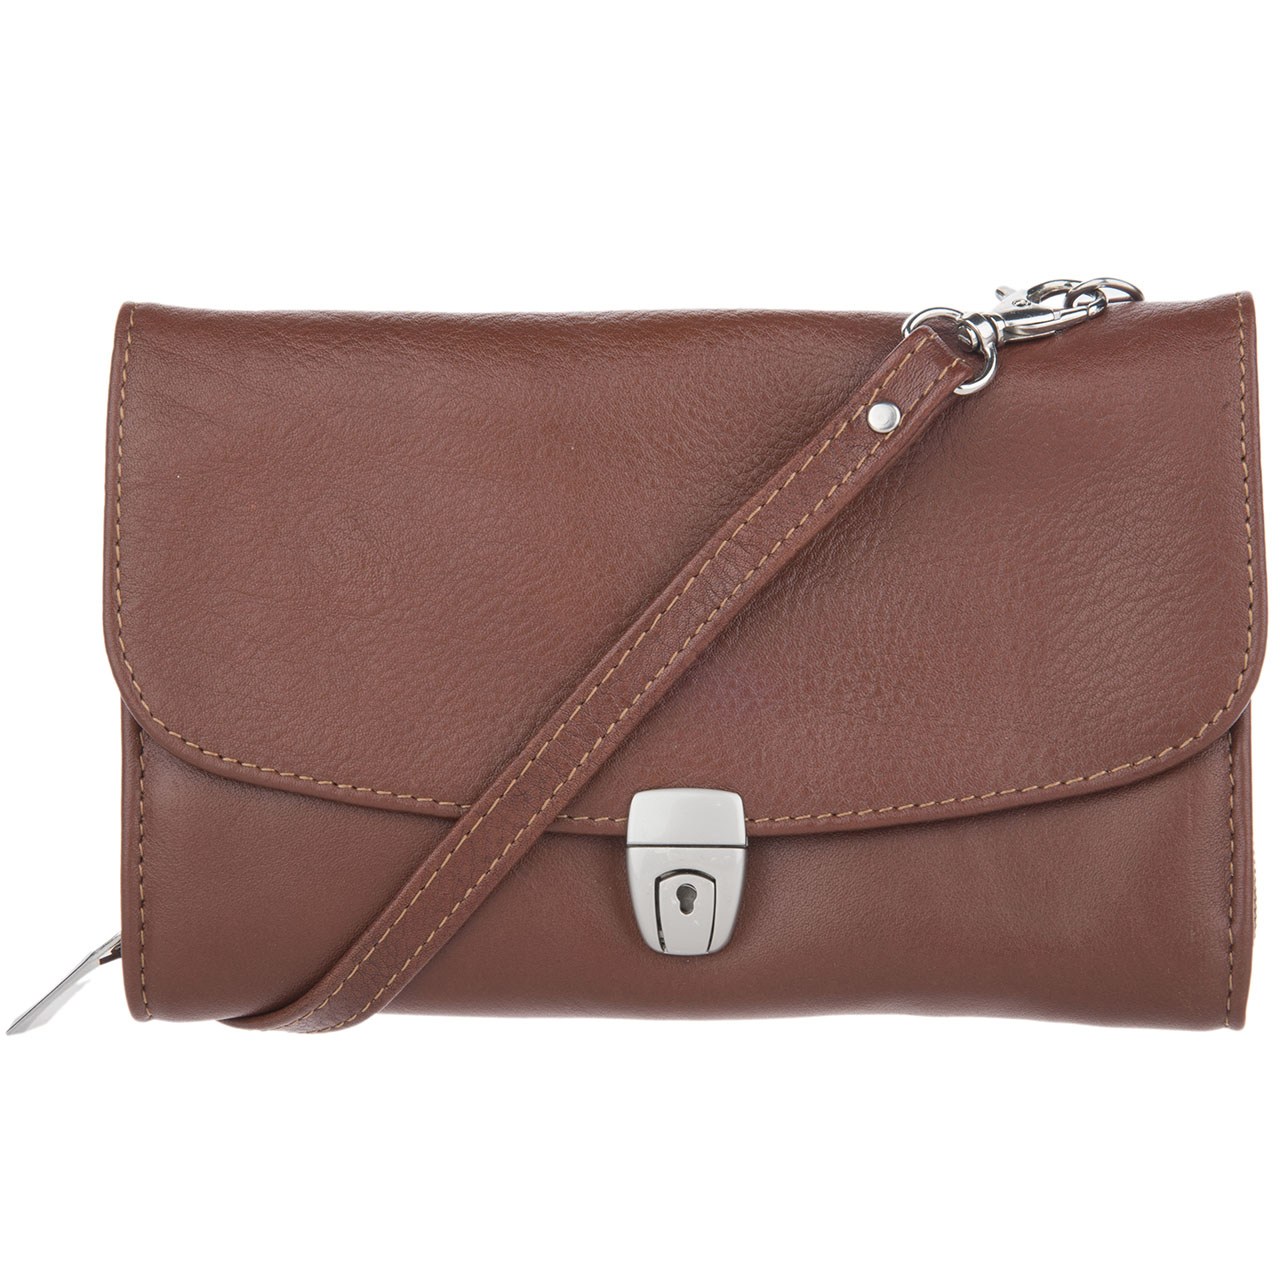 KOHANCHARM gallery natural leather document bag, Model ps12